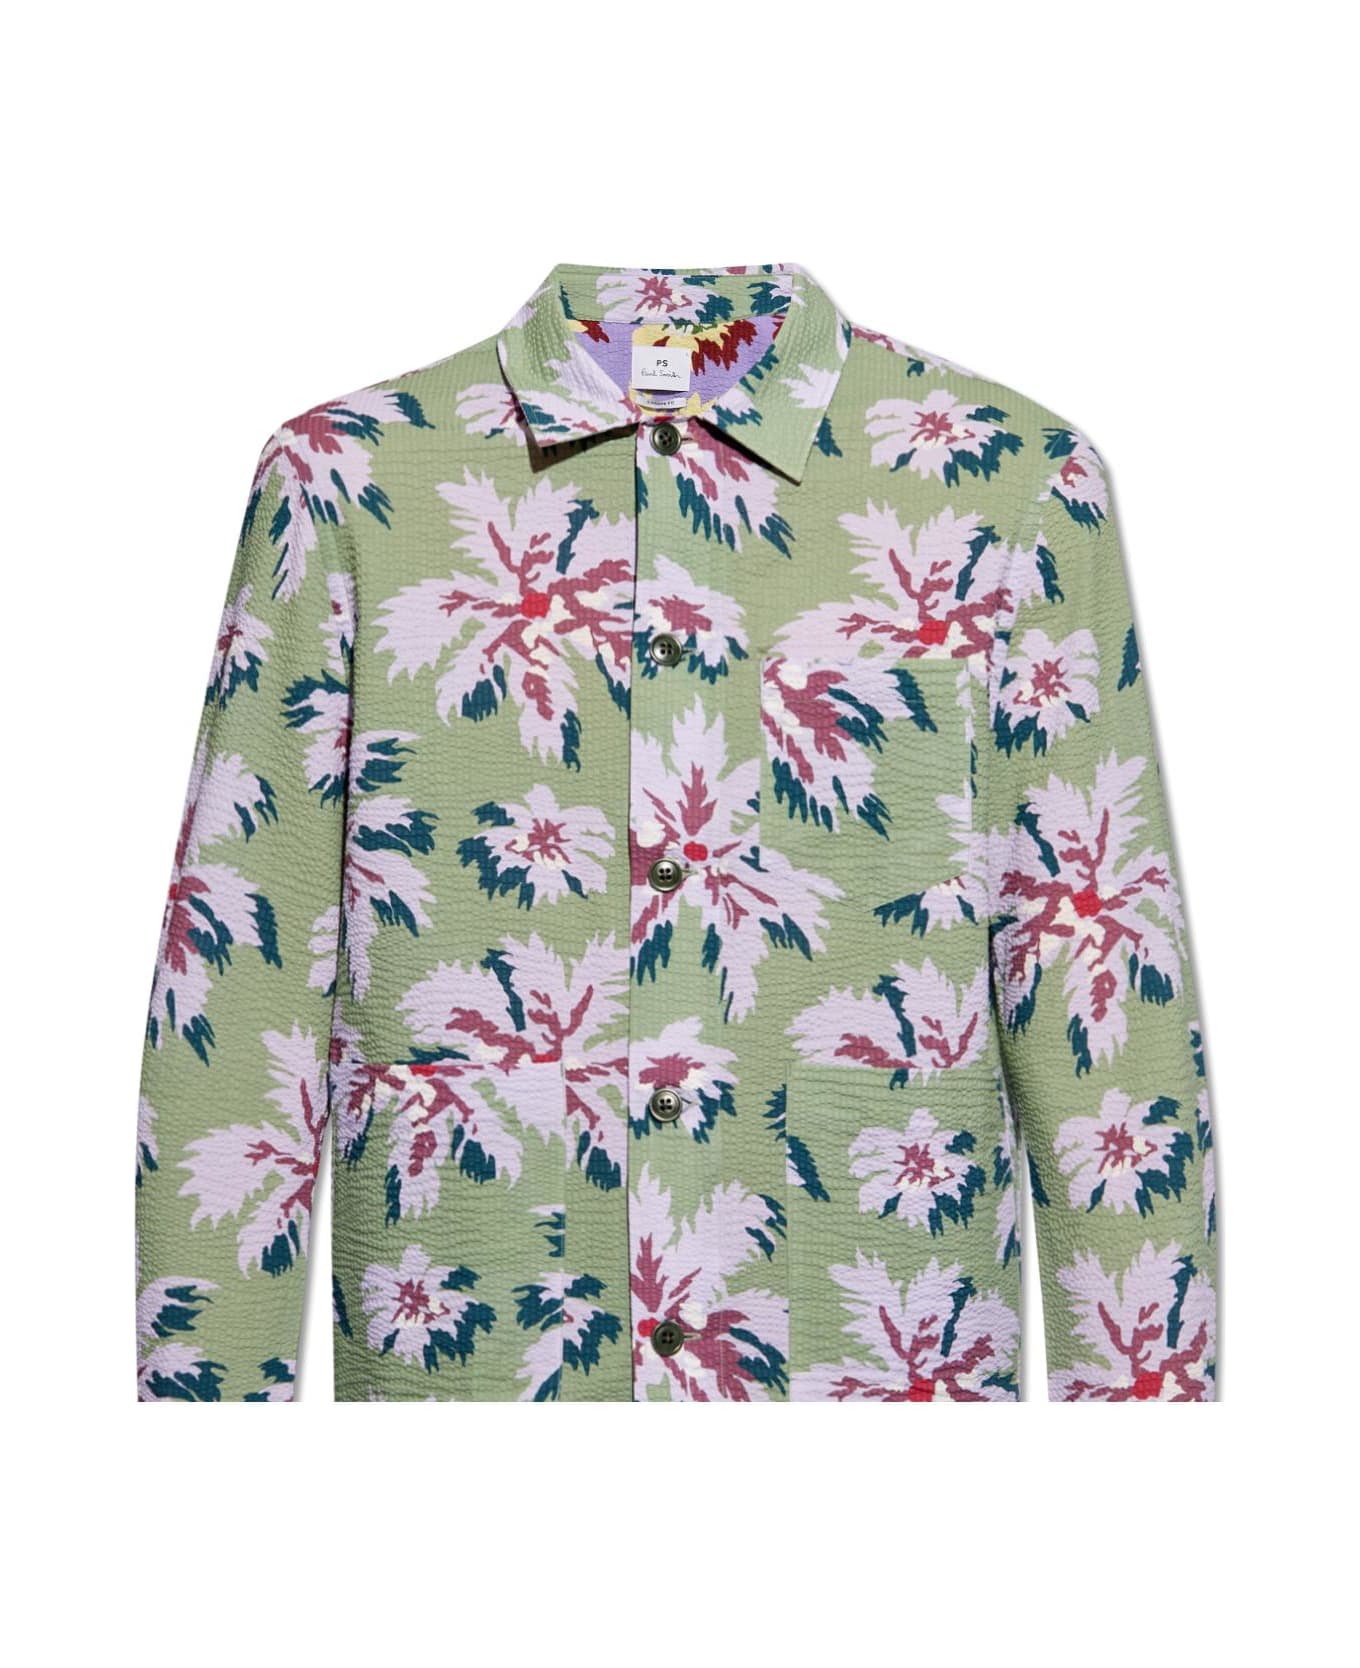 Paul Smith Ps Paul Smith Floral Shirt - MILITARY GREEN